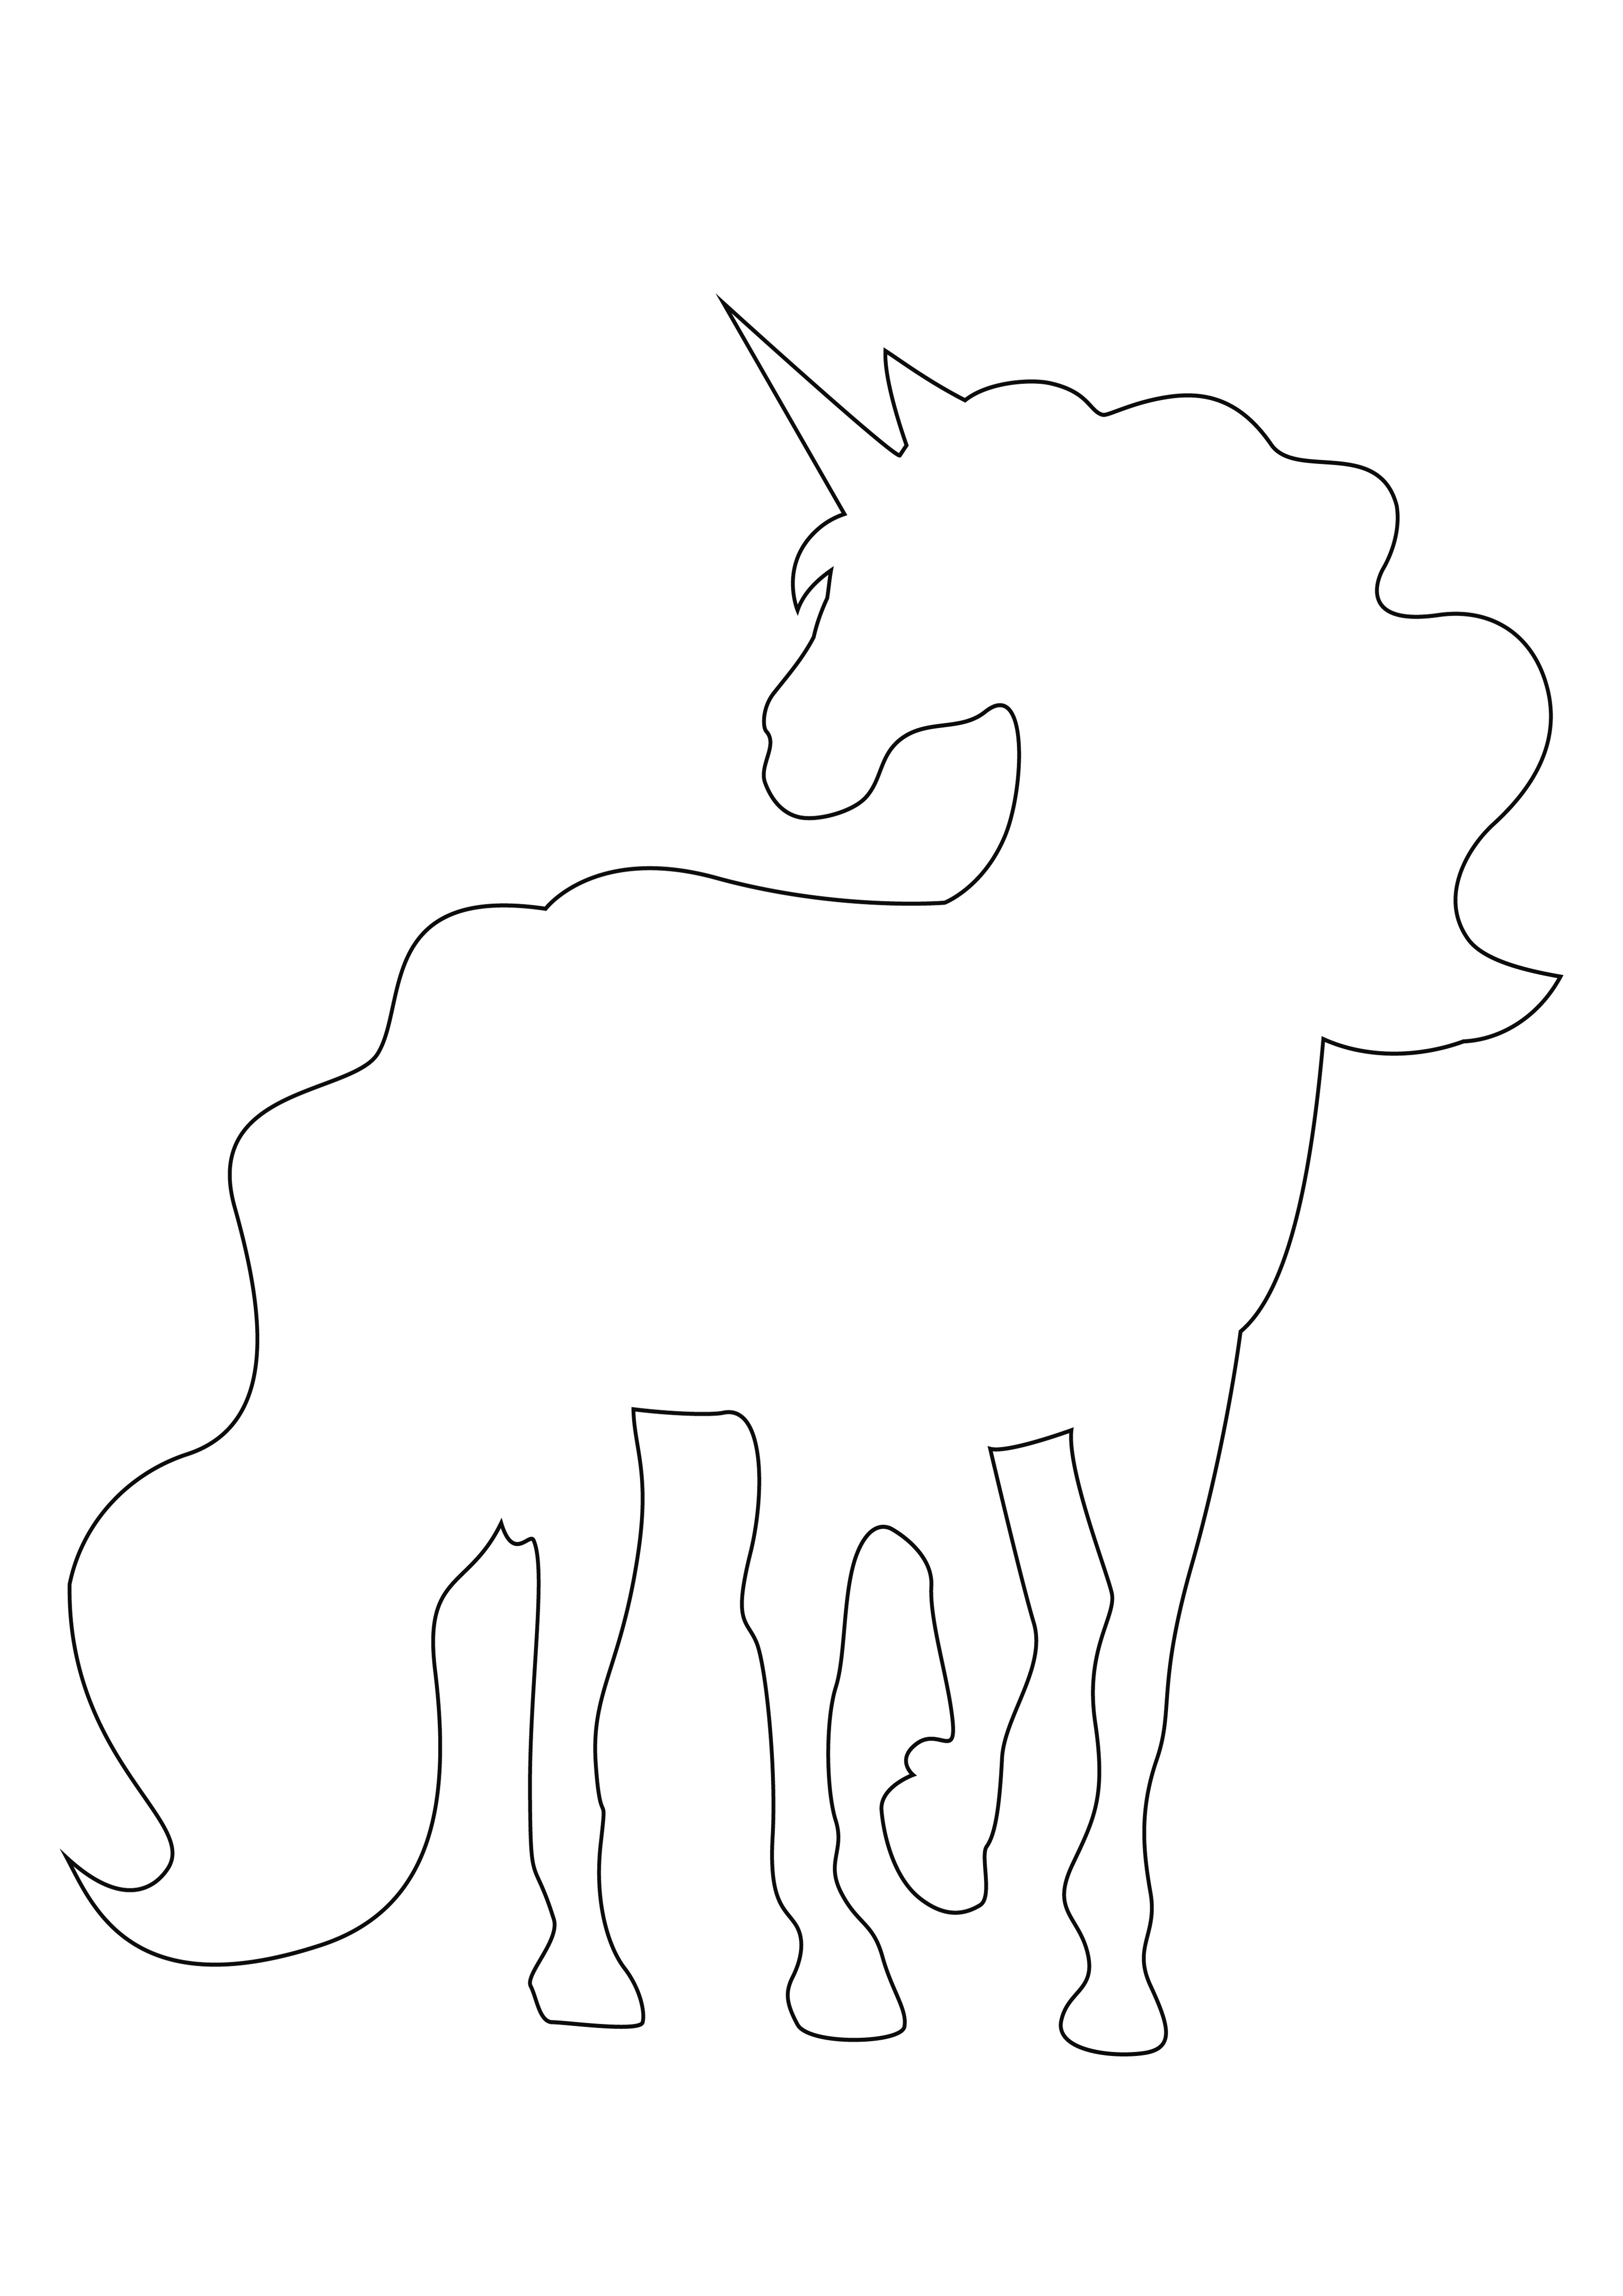 Unicorn free coloring and learning about myths and fairy tales